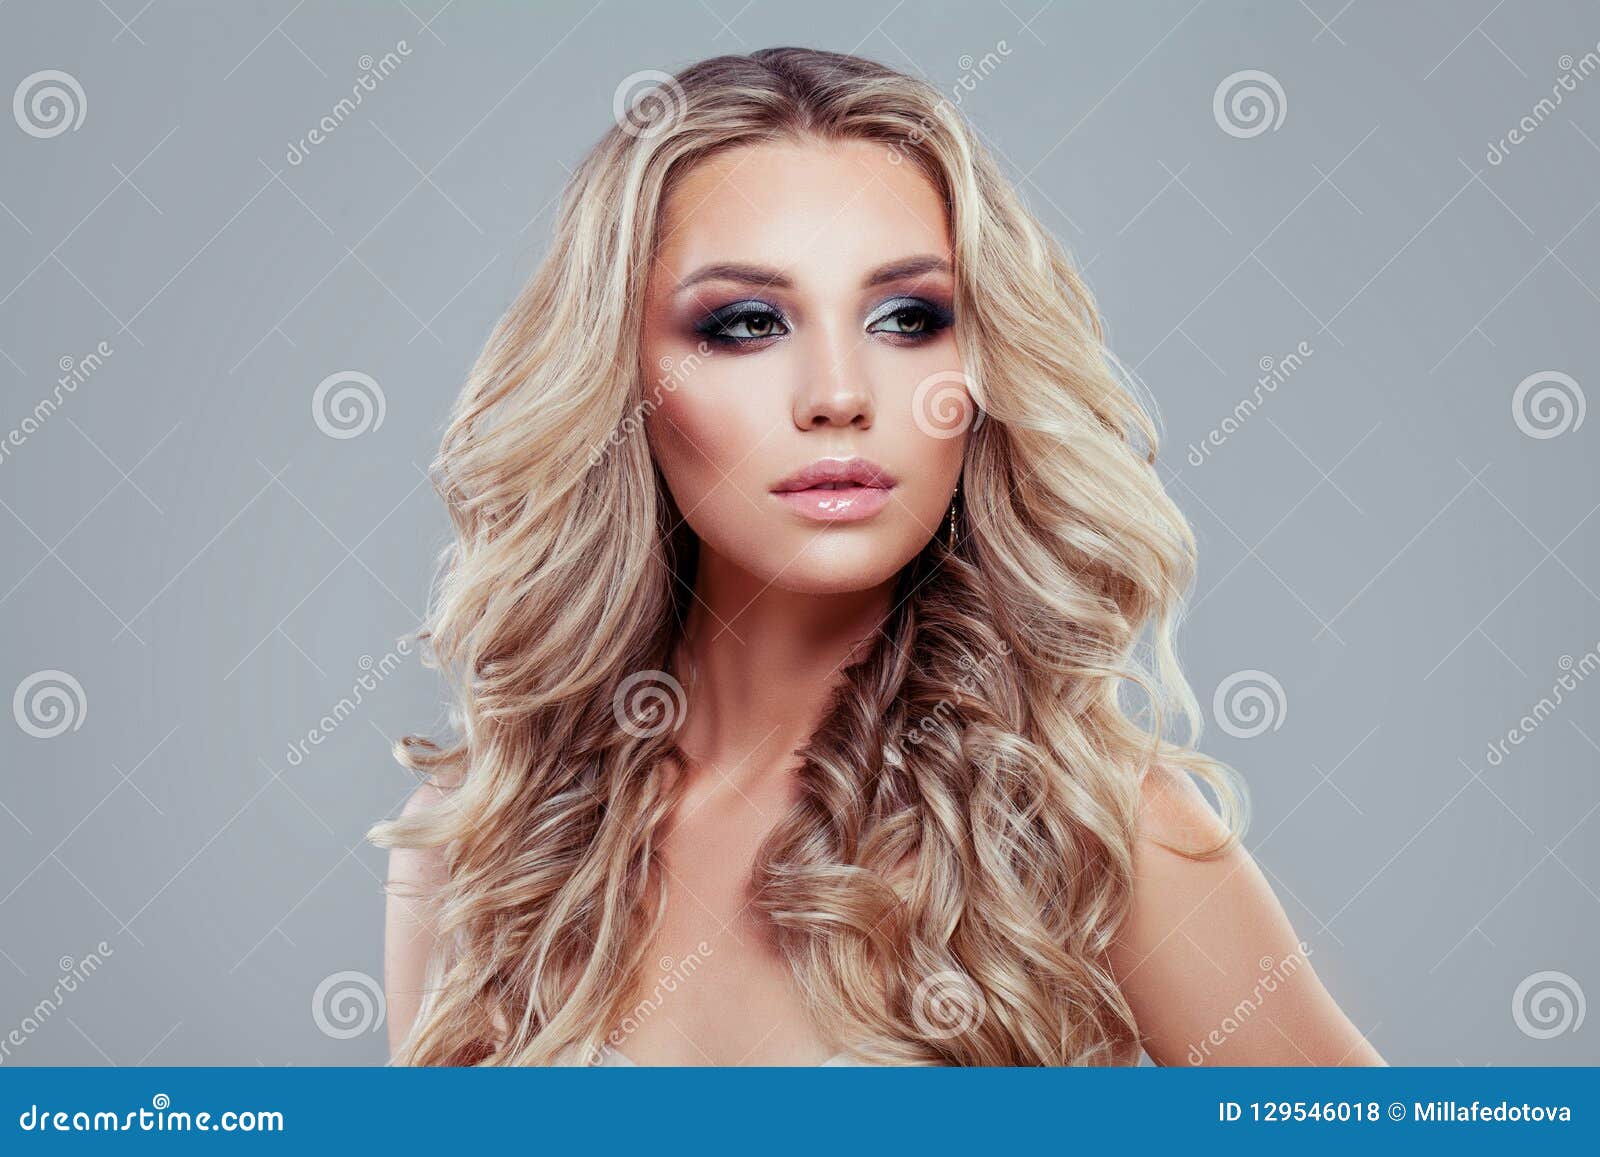 Blonde Beauty. Young Perfect Woman with Long Curly Hair Stock Photo - Image  of haircut, female: 129546018